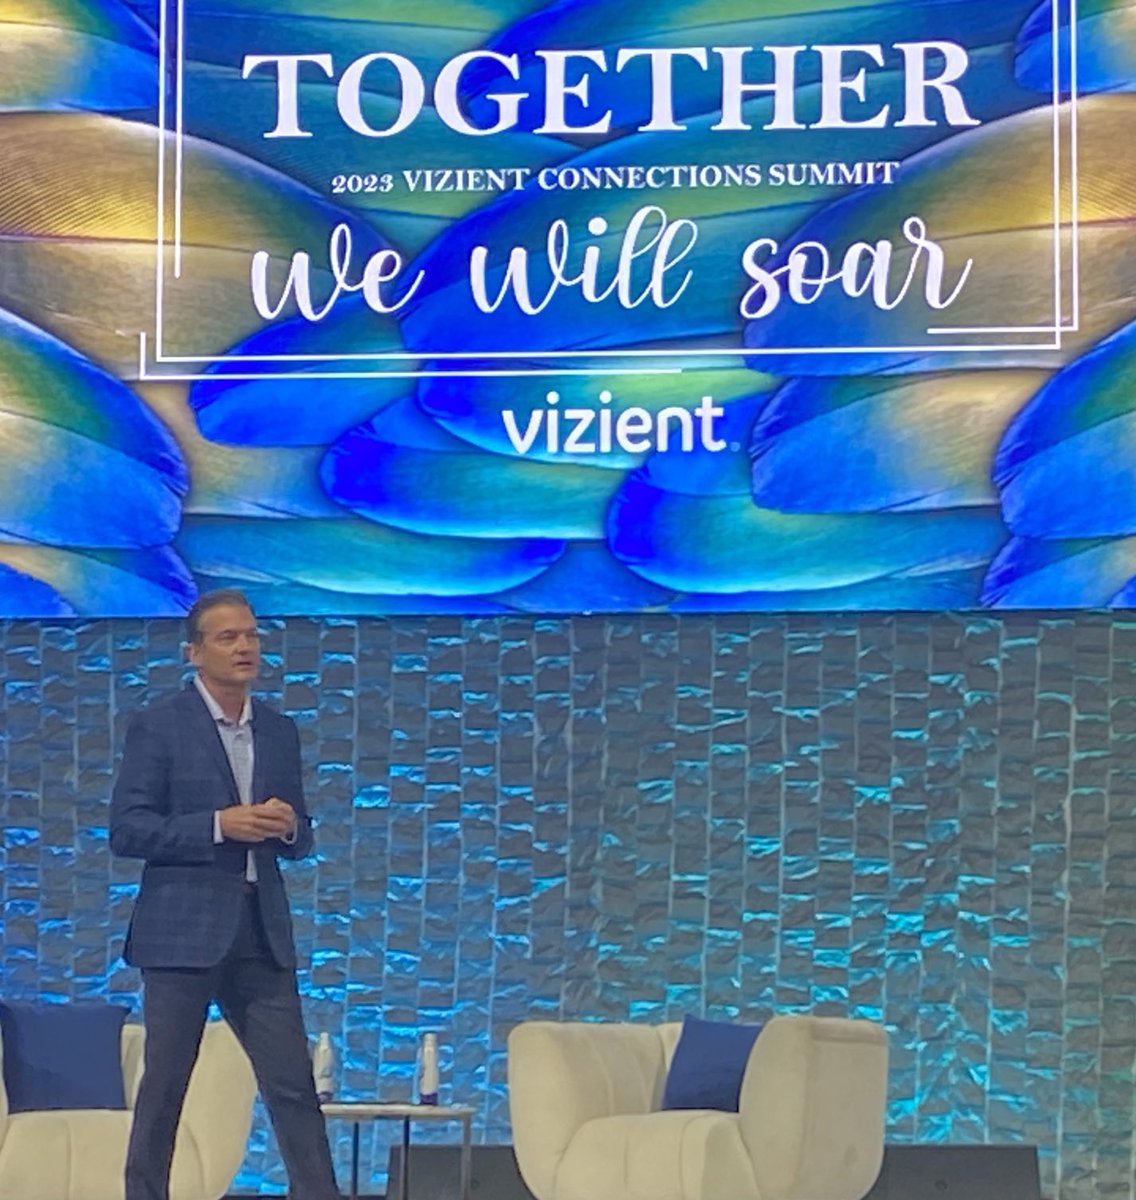 Kicking off the ⁦@VizientInc⁩ conference with a great message from President Bryan Jobe. Find your Charlie Taylor! Charlie was the instrumental engineer in helping the Wright Brothers launch their first flight. #VizientSummit #TogetherWeWillSoar